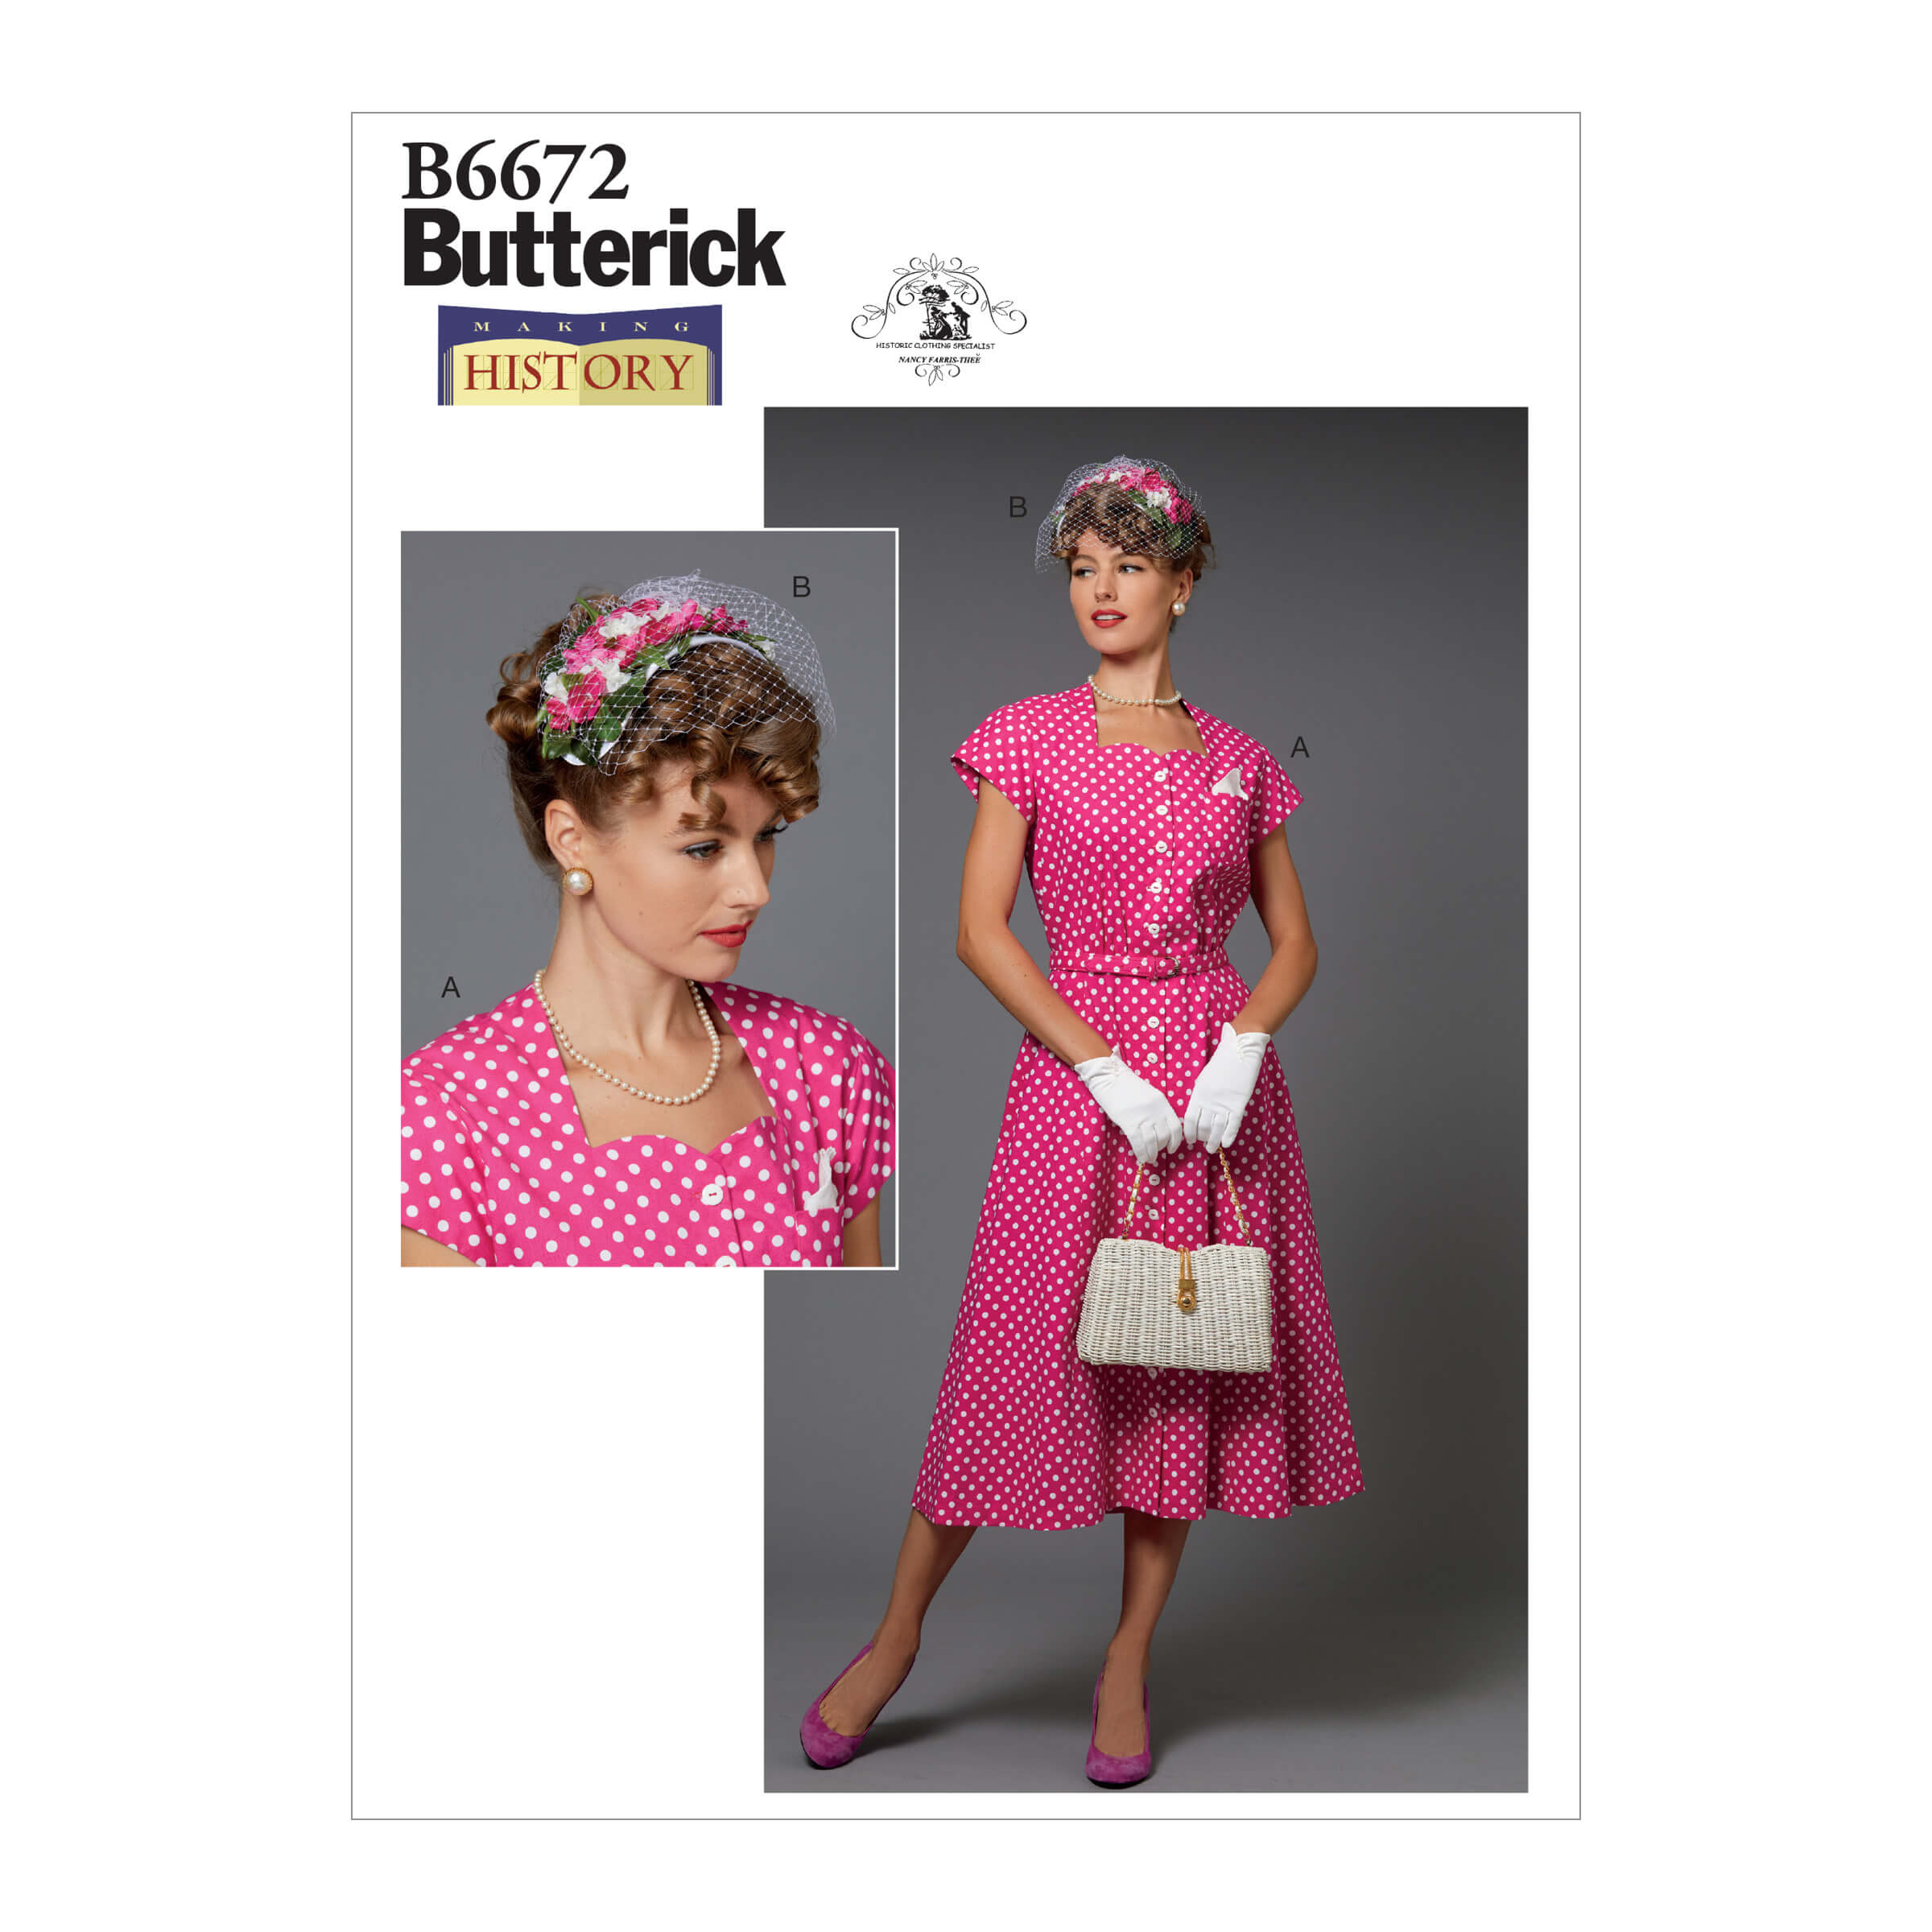 Butterick Sewing Pattern B6672 Misses' Costume and Hat